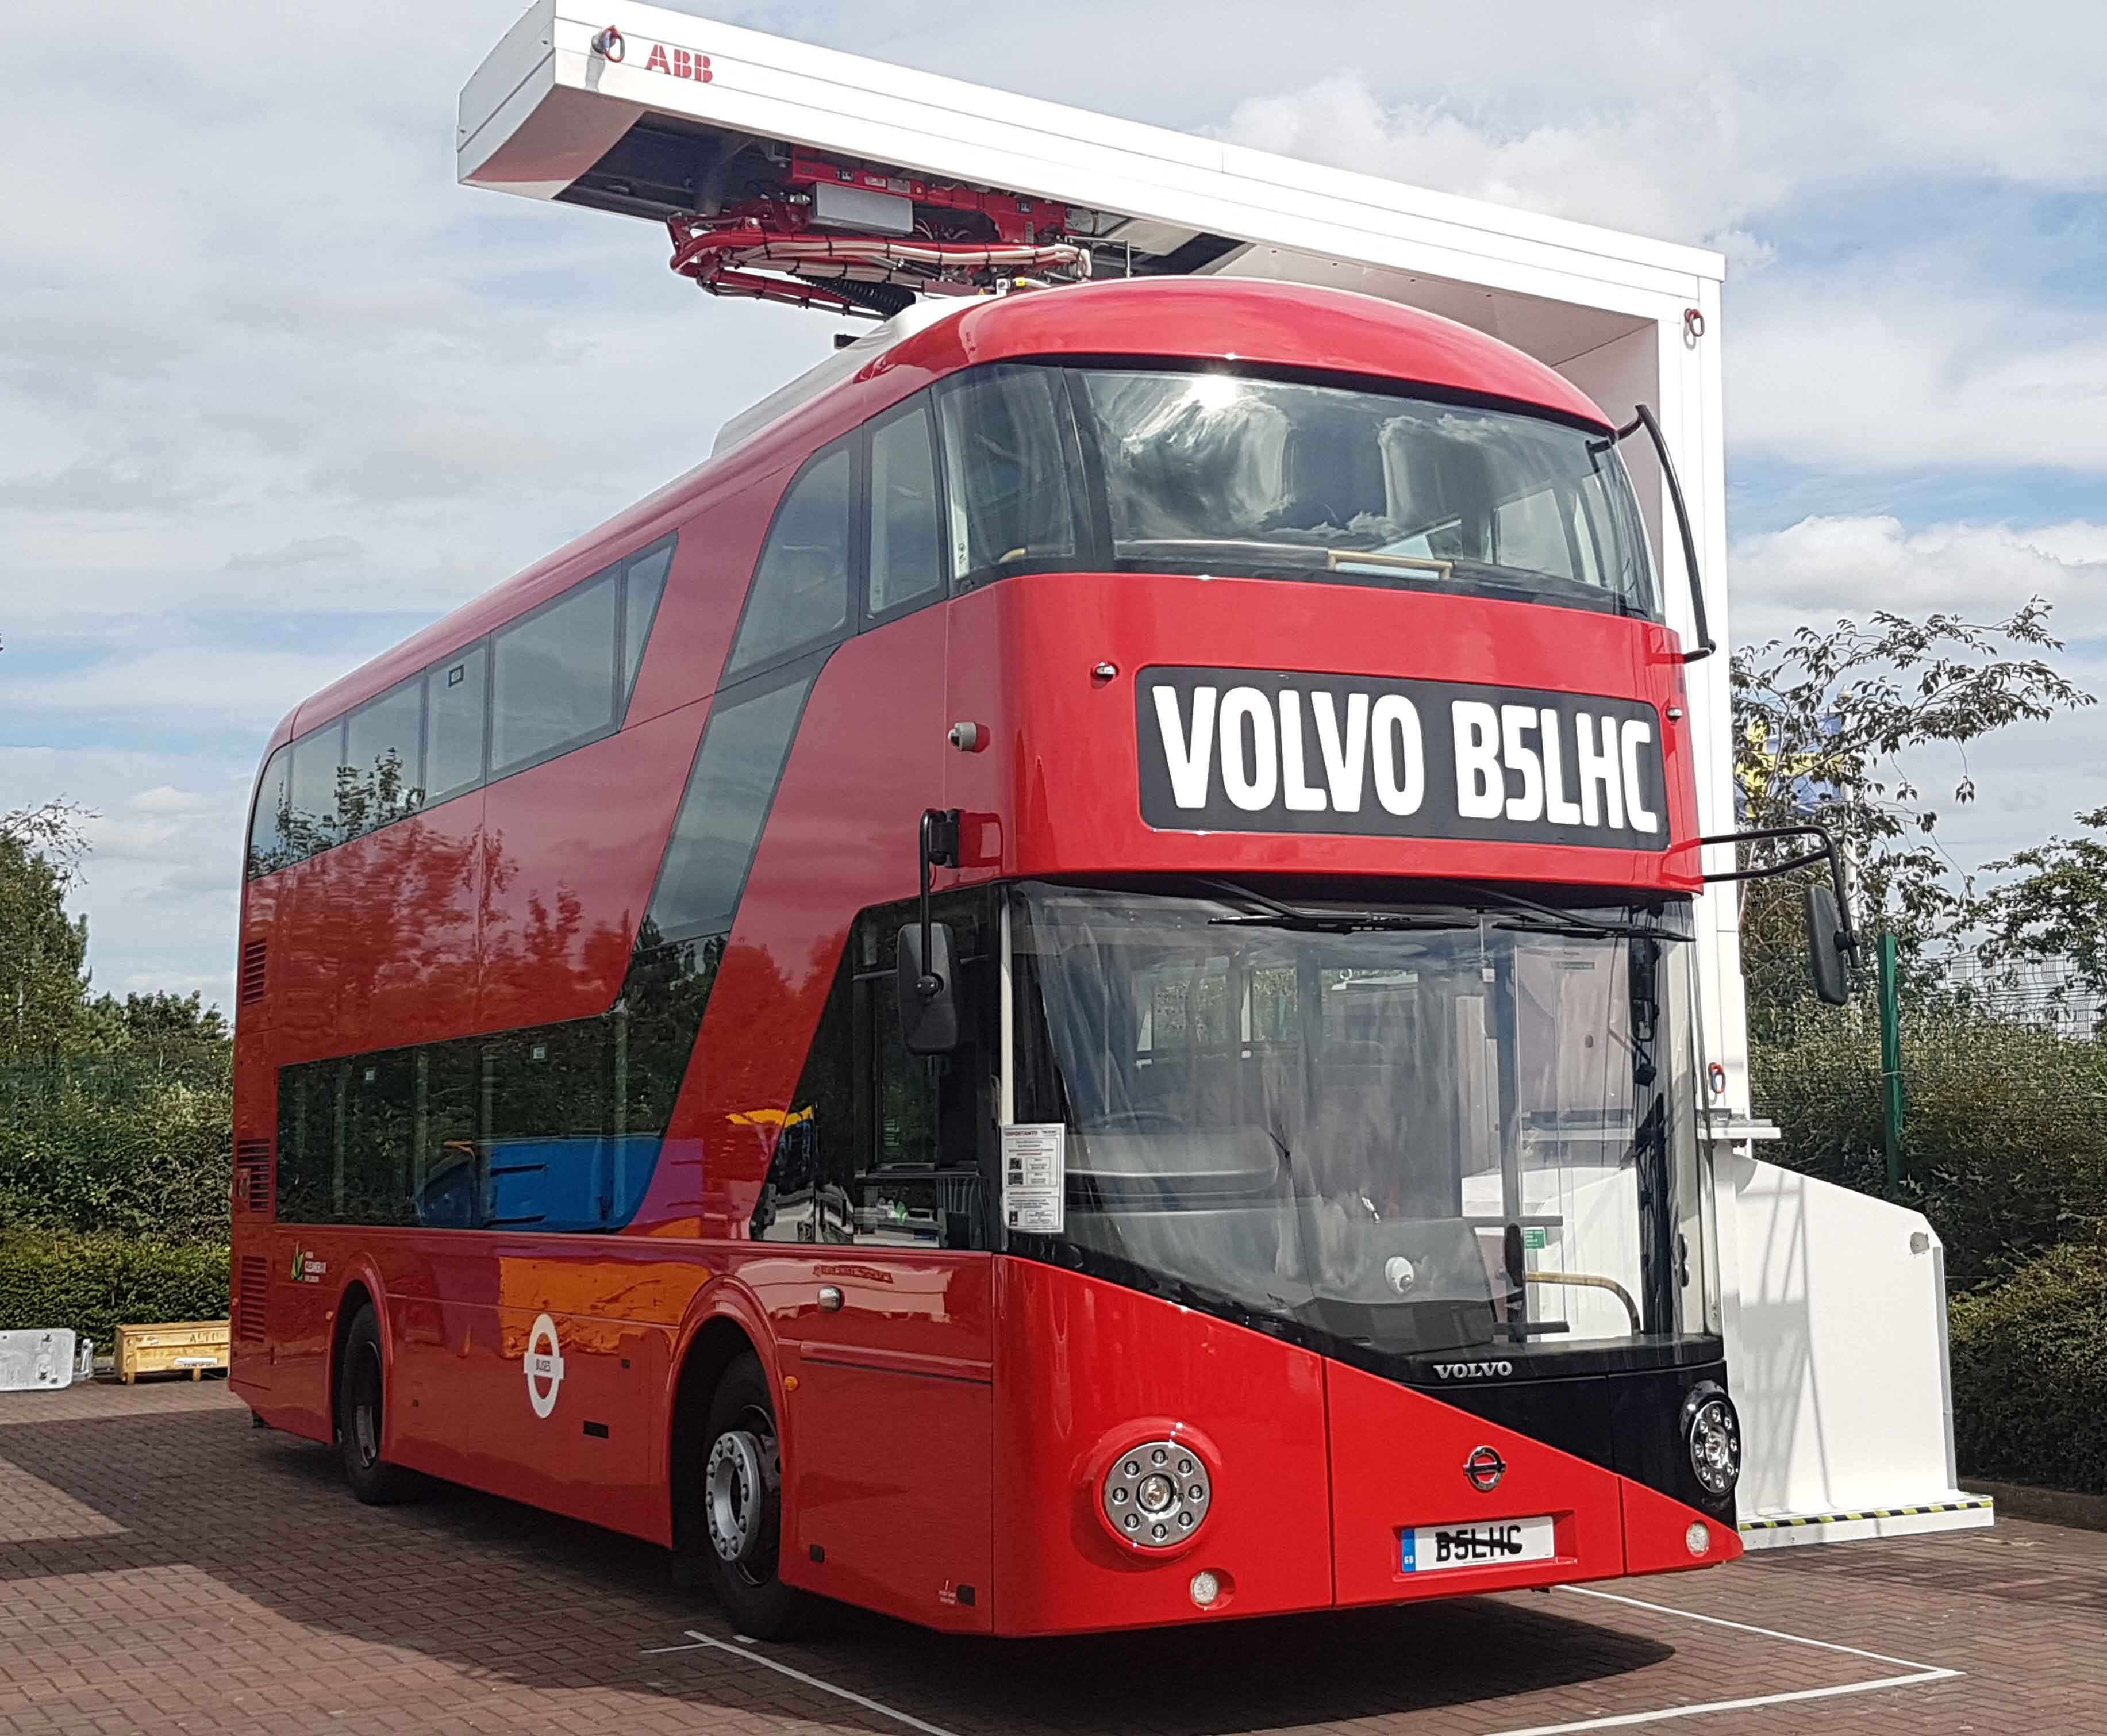 ABB powers Volvo's electric bus in UK demonstration tour